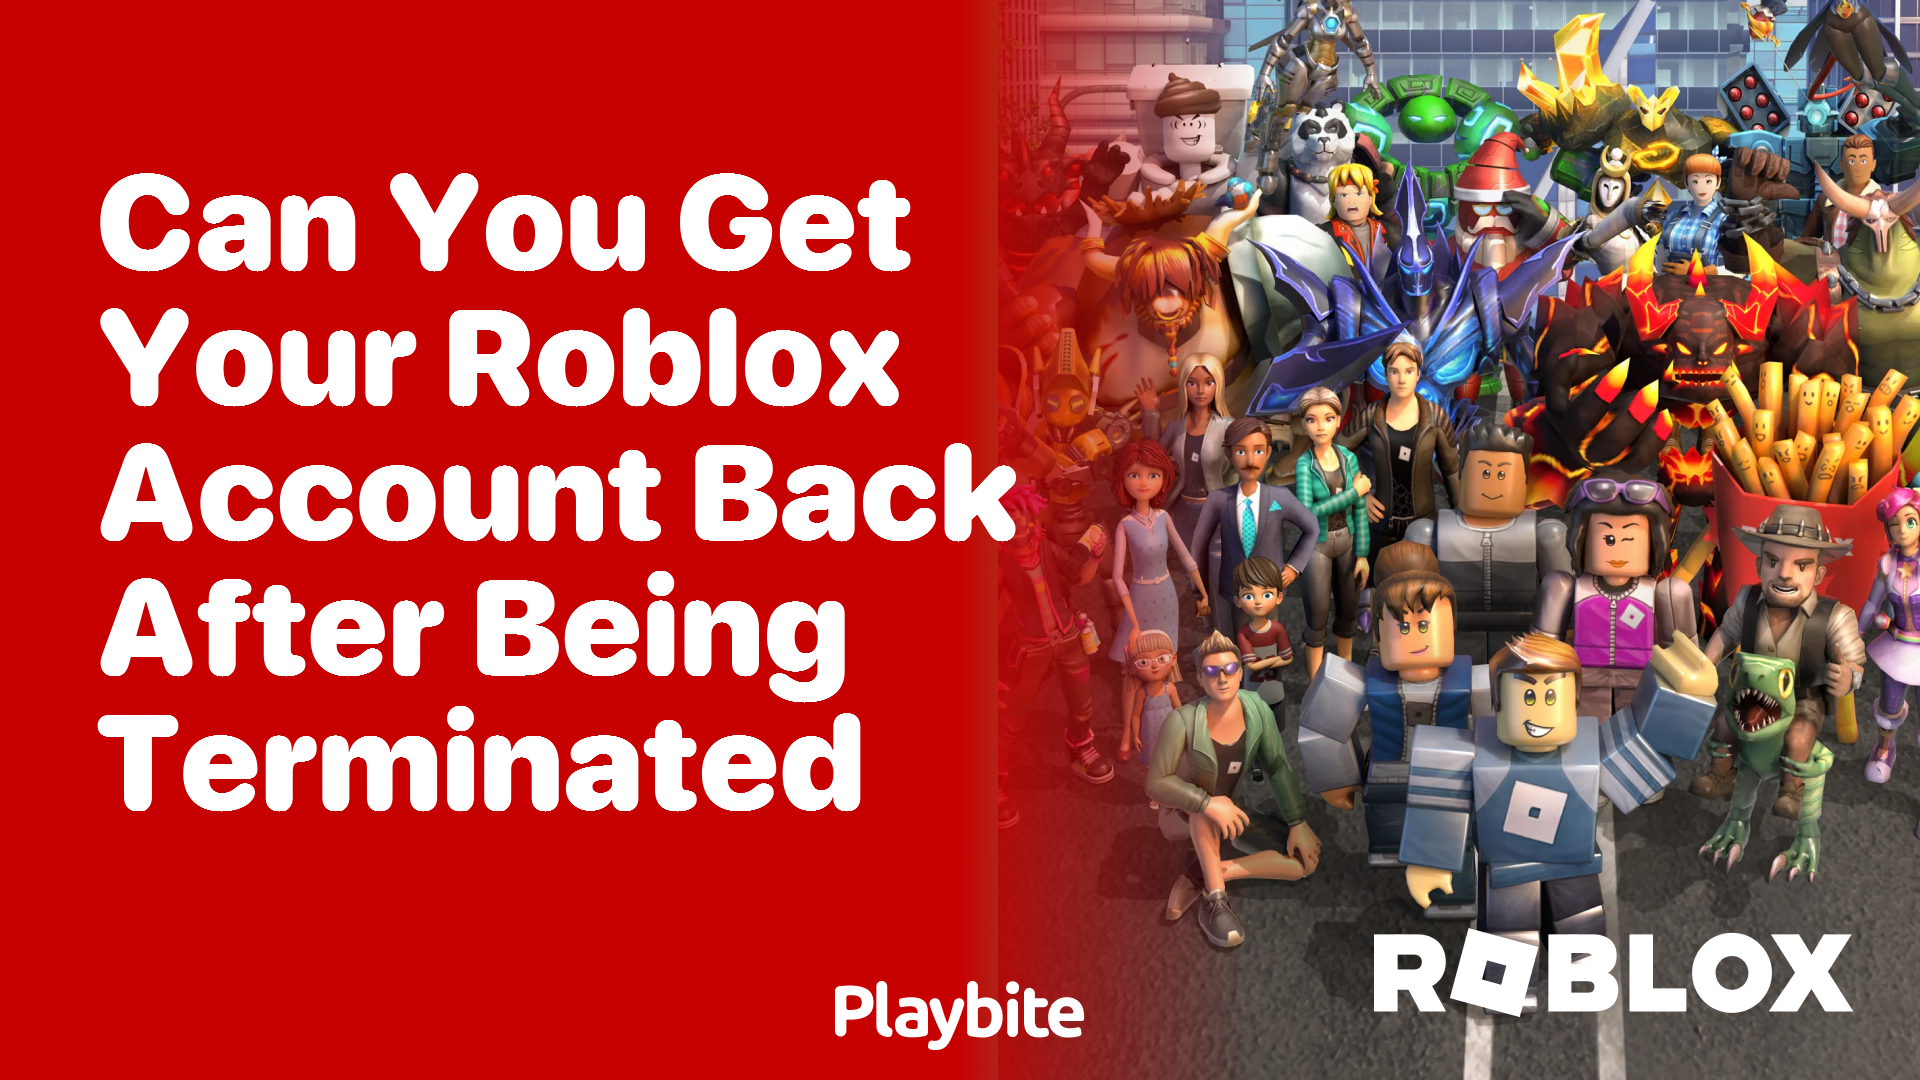 Can You Get Your Roblox Account Back After Being Terminated?